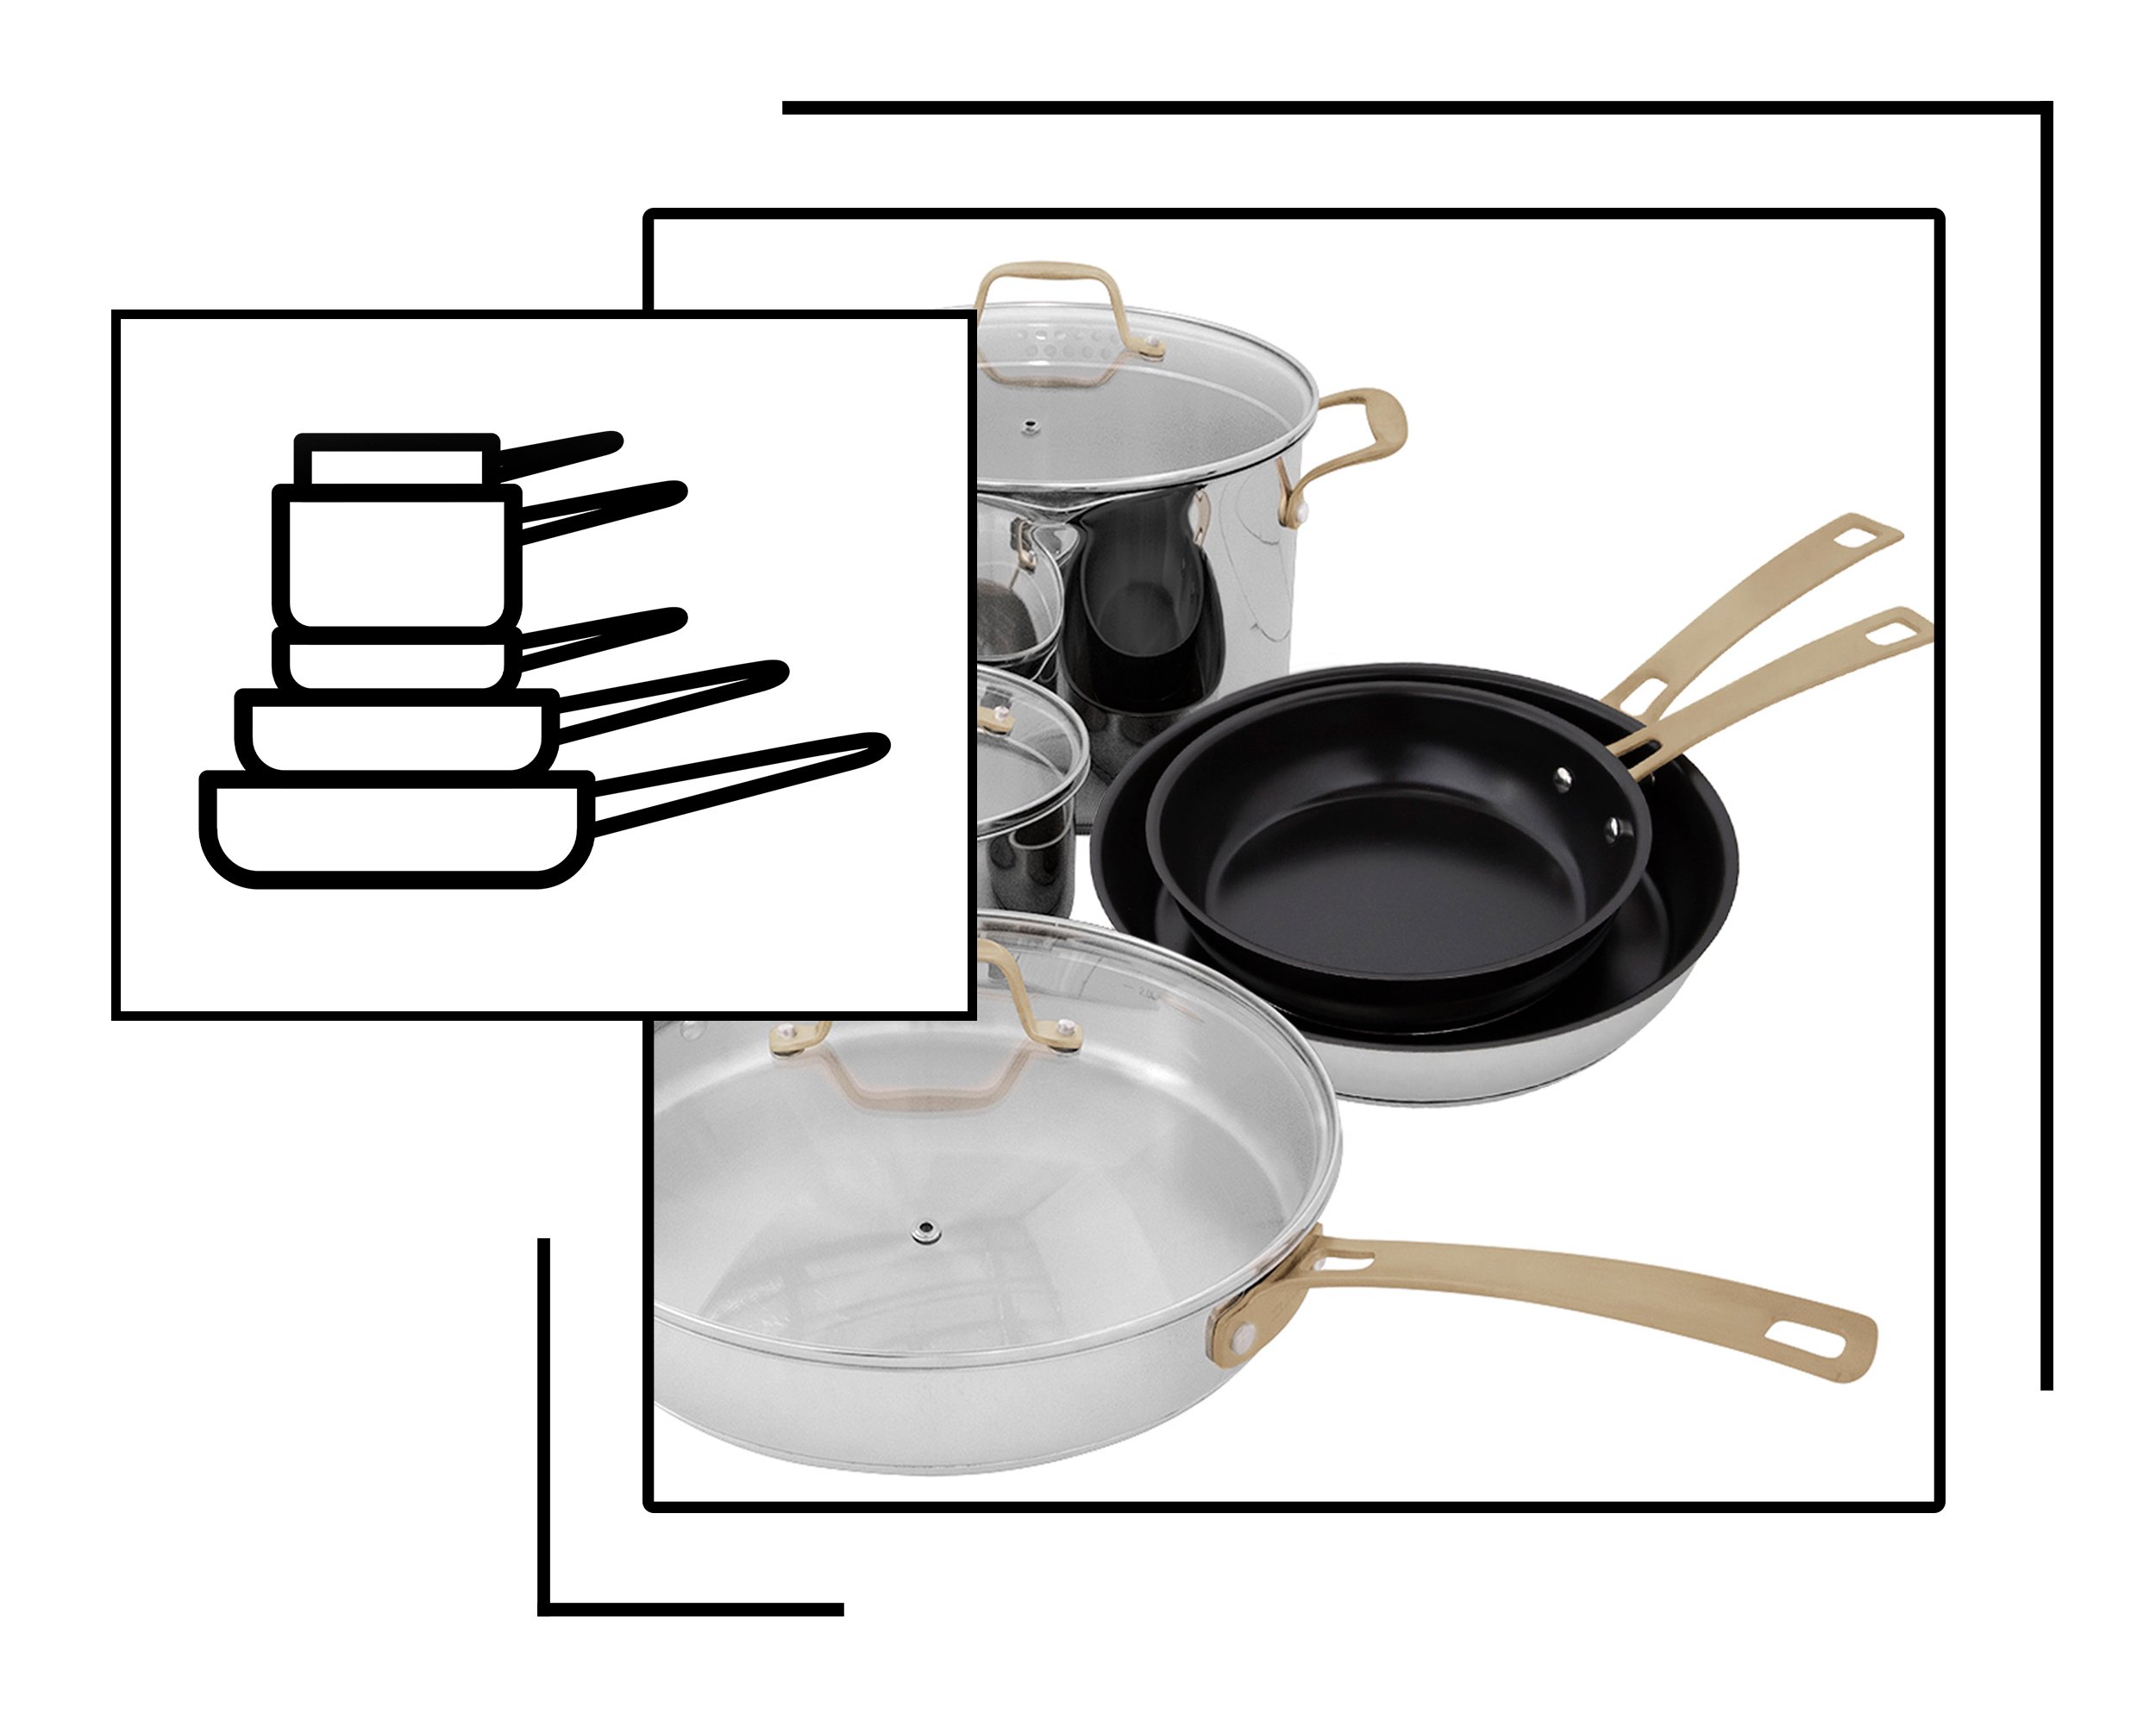 ZLINE 10-Piece Non-Toxic Stainless Steel and Nonstick Ceramic Cookware Set (CWSETL-NS-10)